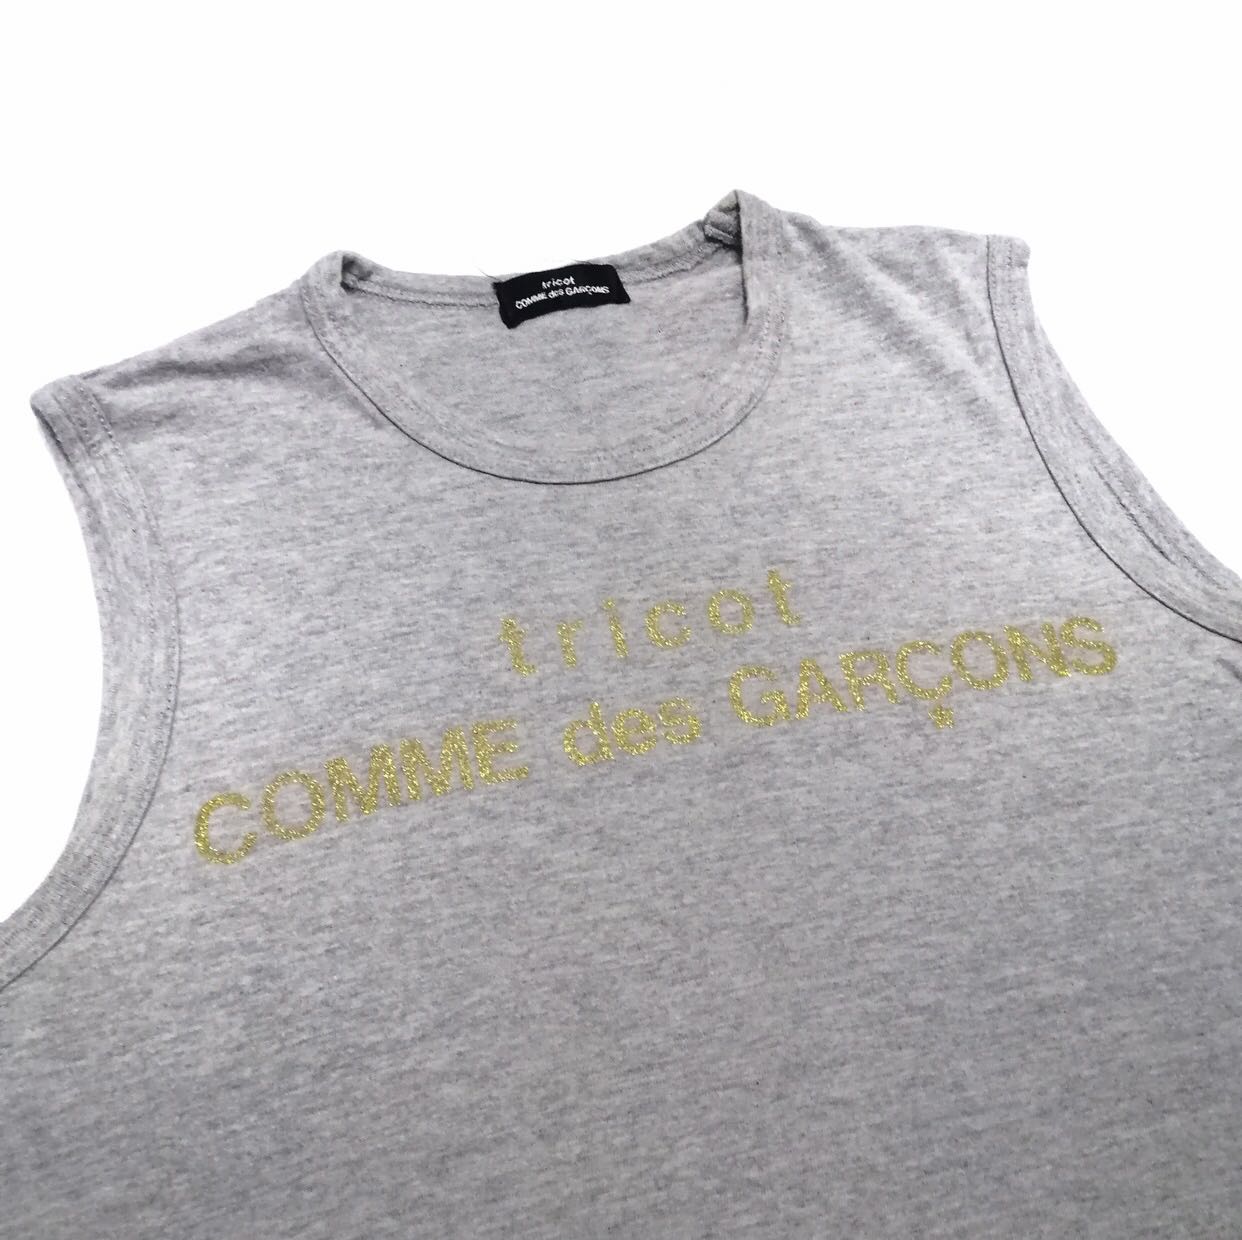 🔥 2001 Comme des garcons tricot sleeveless glitter gold logo - 3